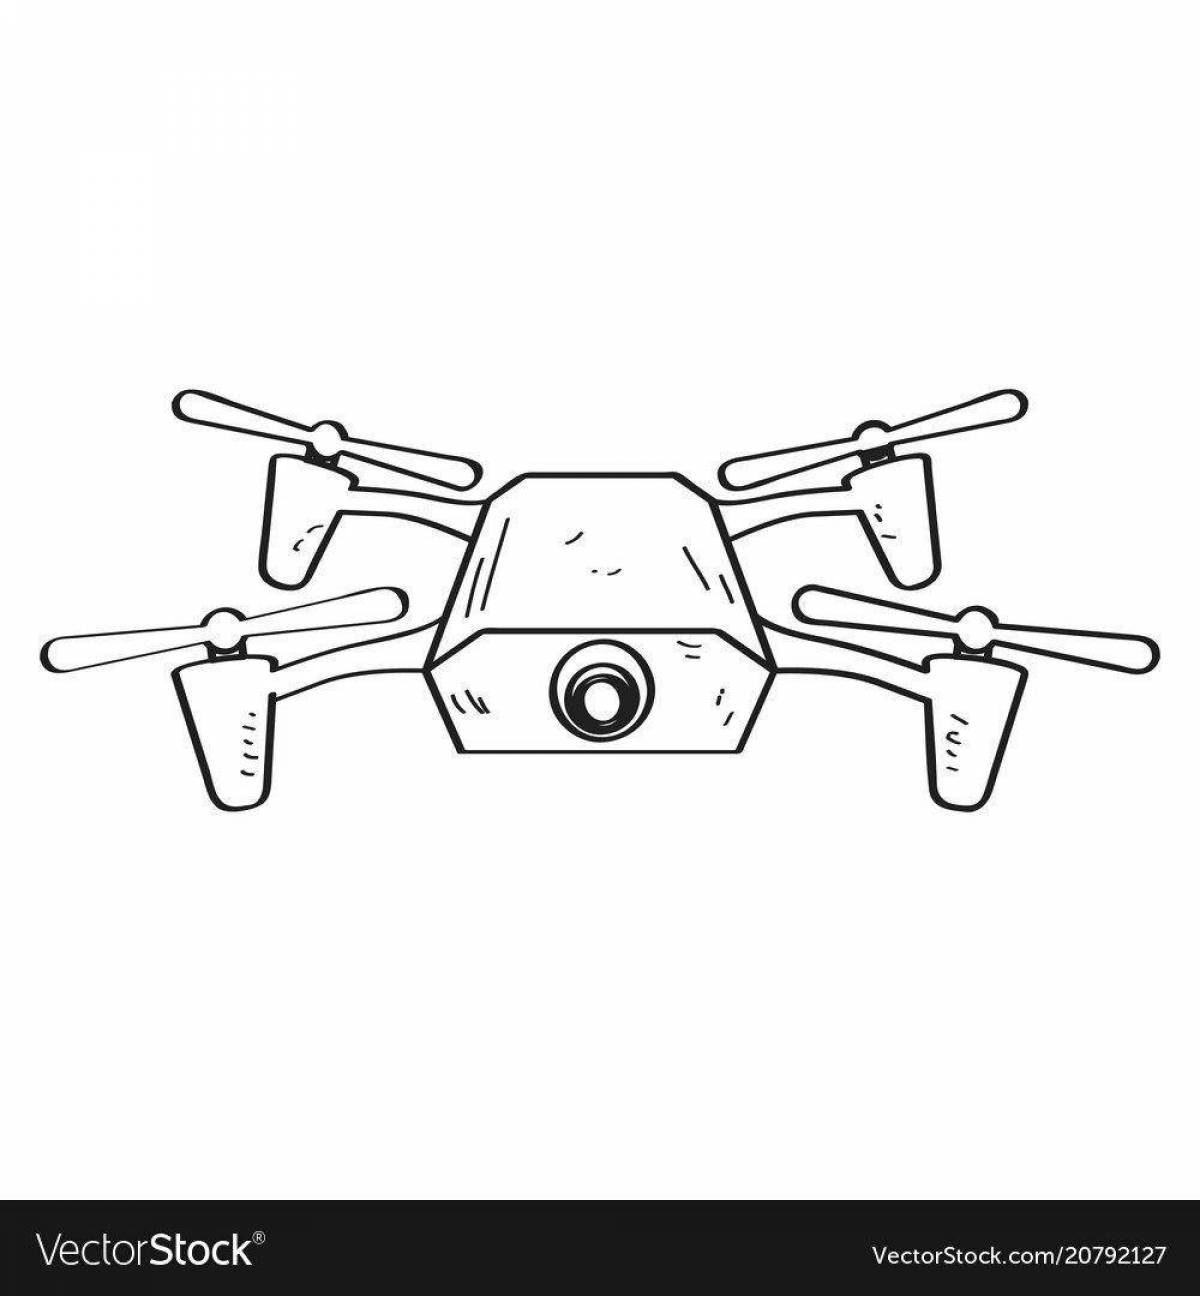 Intriguing quadcopter coloring page